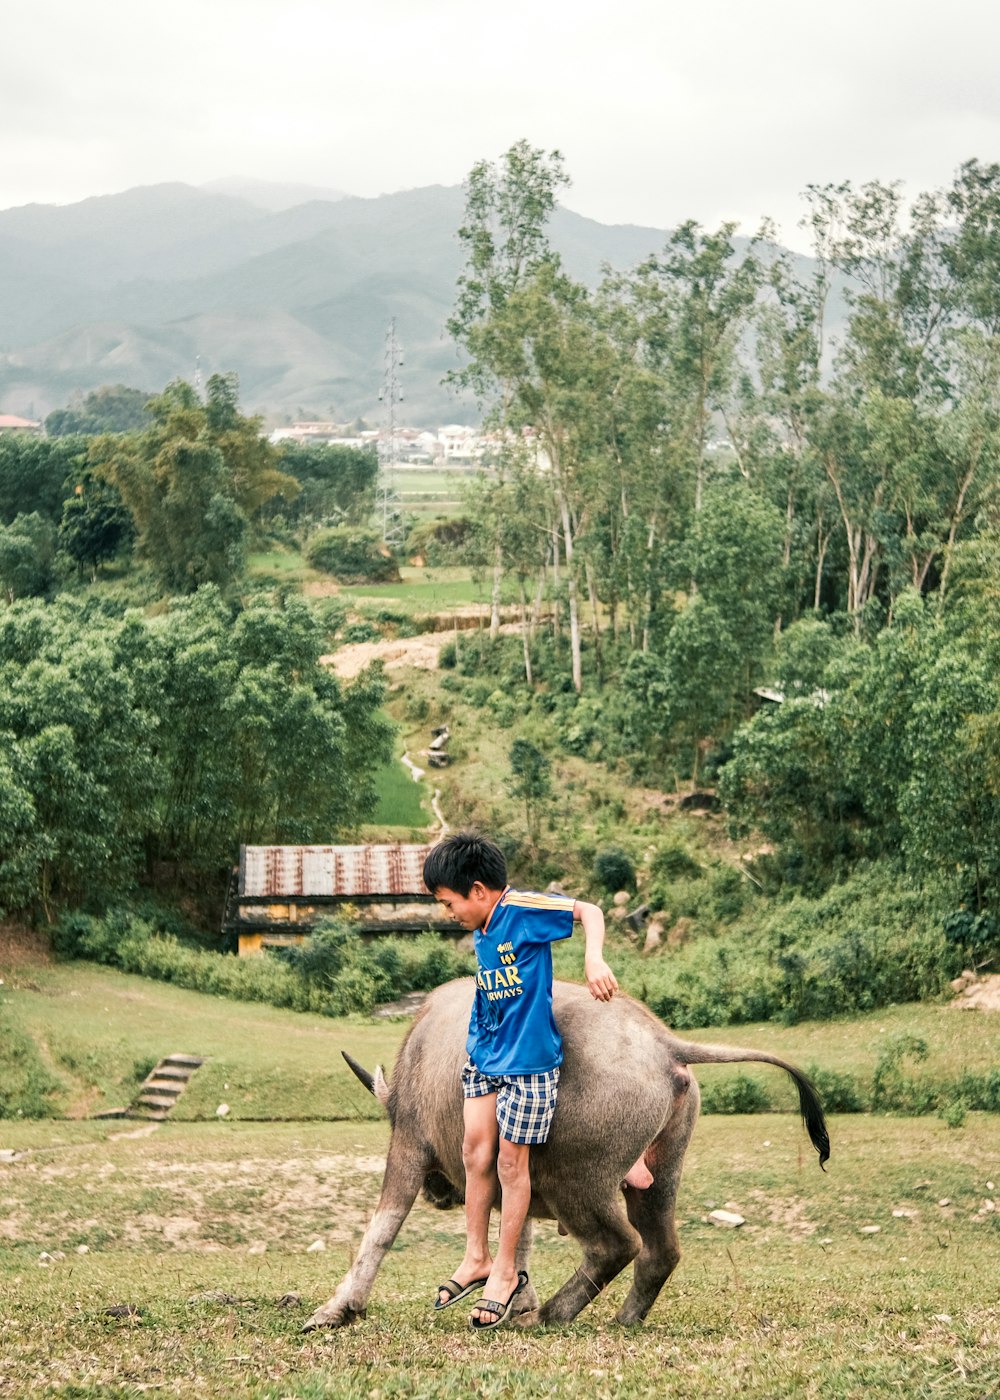 a young boy riding on the back of an animal